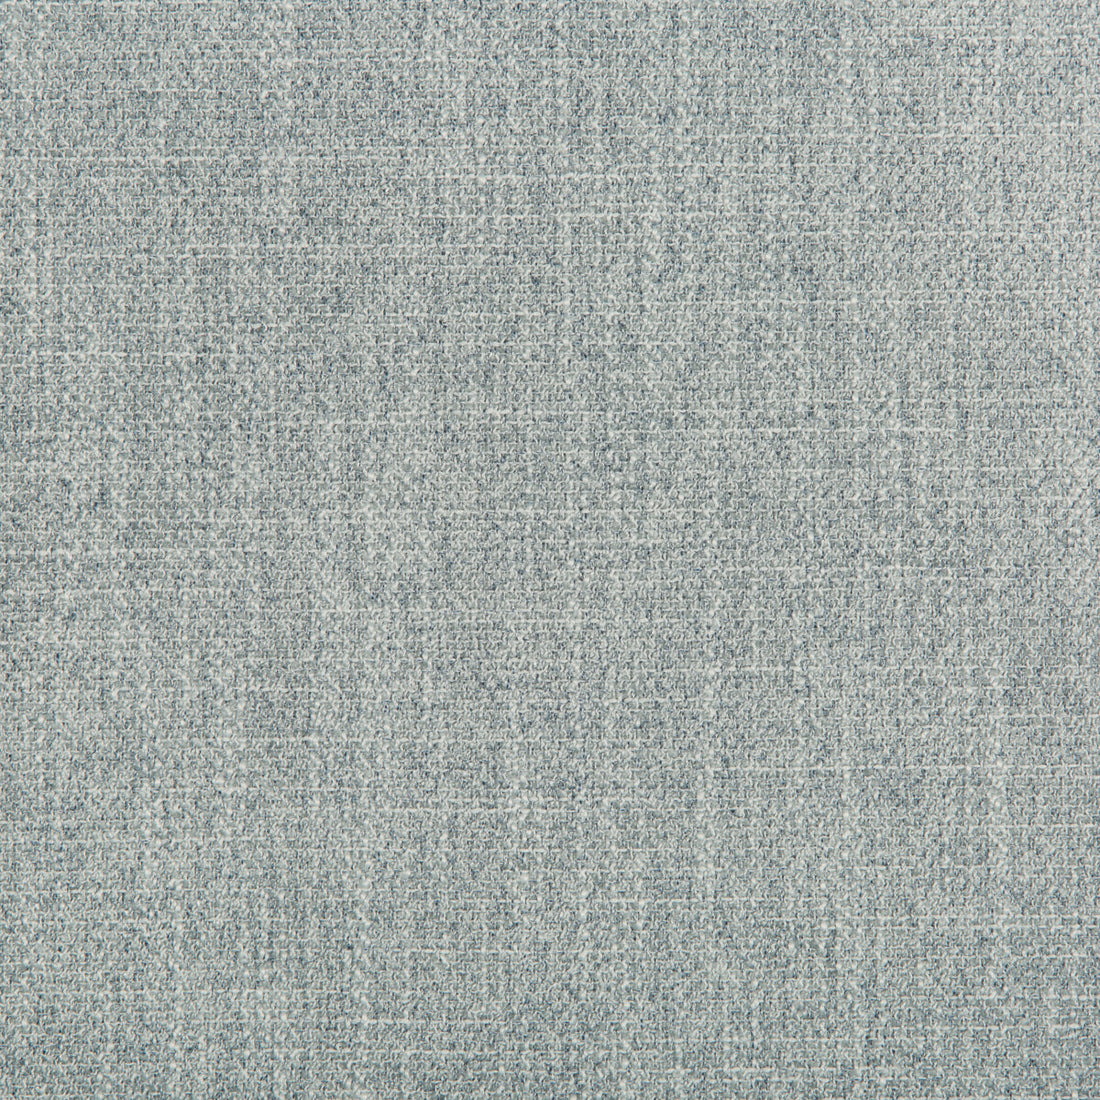 Kf Smt fabric - pattern 35390.15.0 - by Kravet Smart in the Performance Crypton Home collection